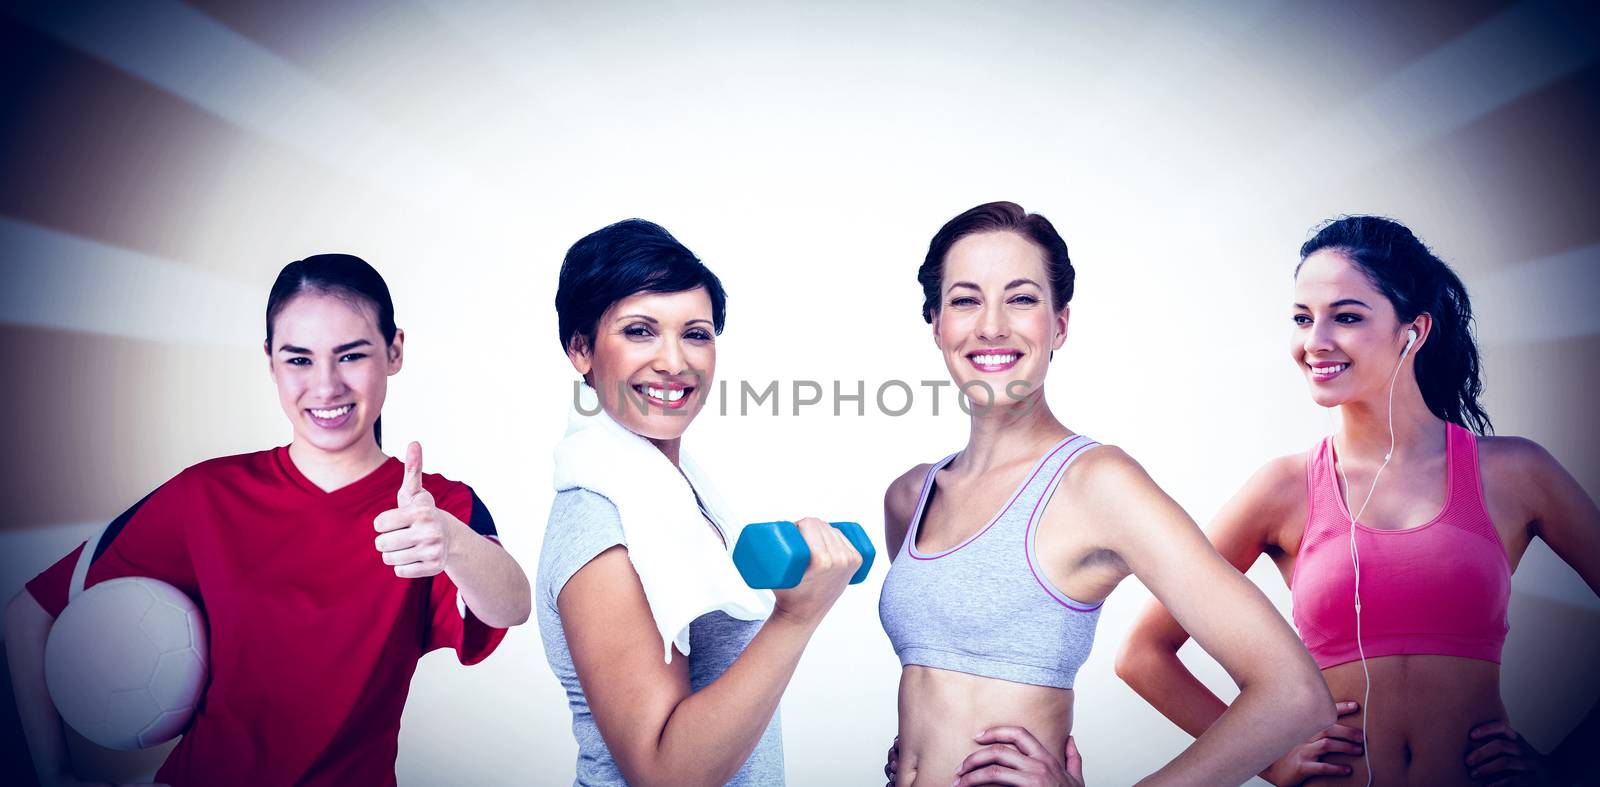 Composite image of fit people by Wavebreakmedia